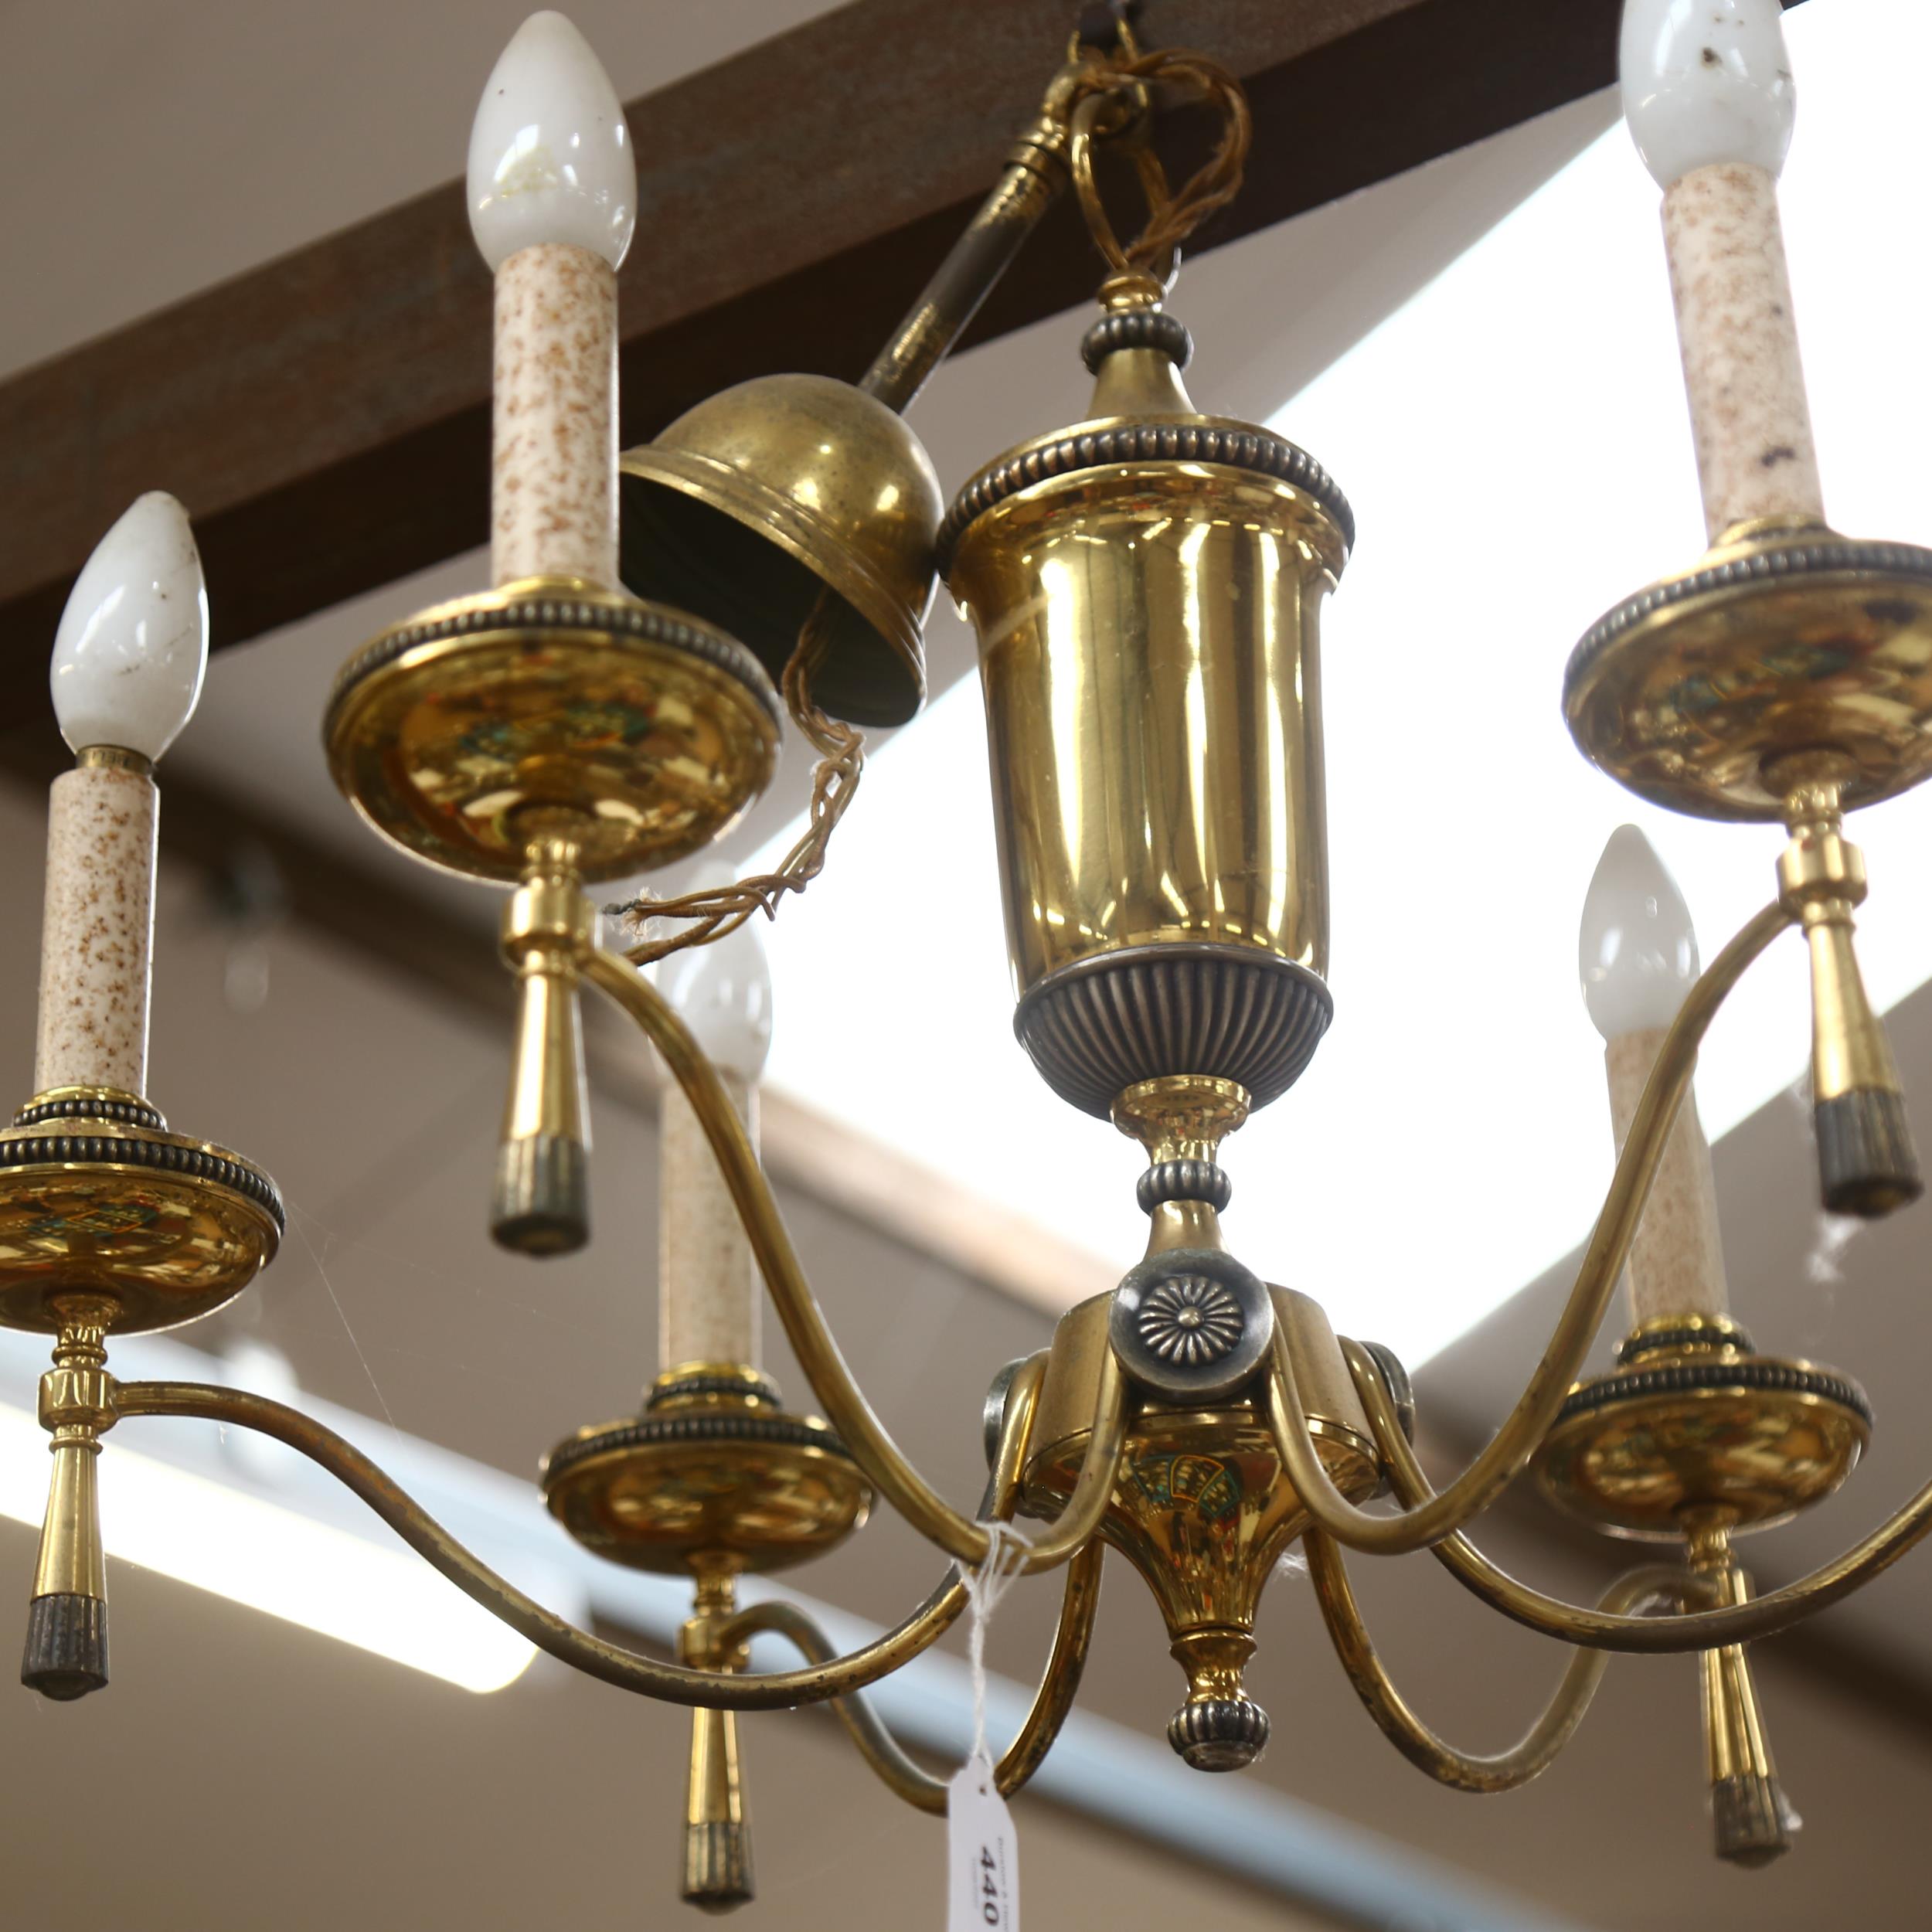 A French Empire style brass 6-branch chandelier, height 70cm - Image 2 of 2